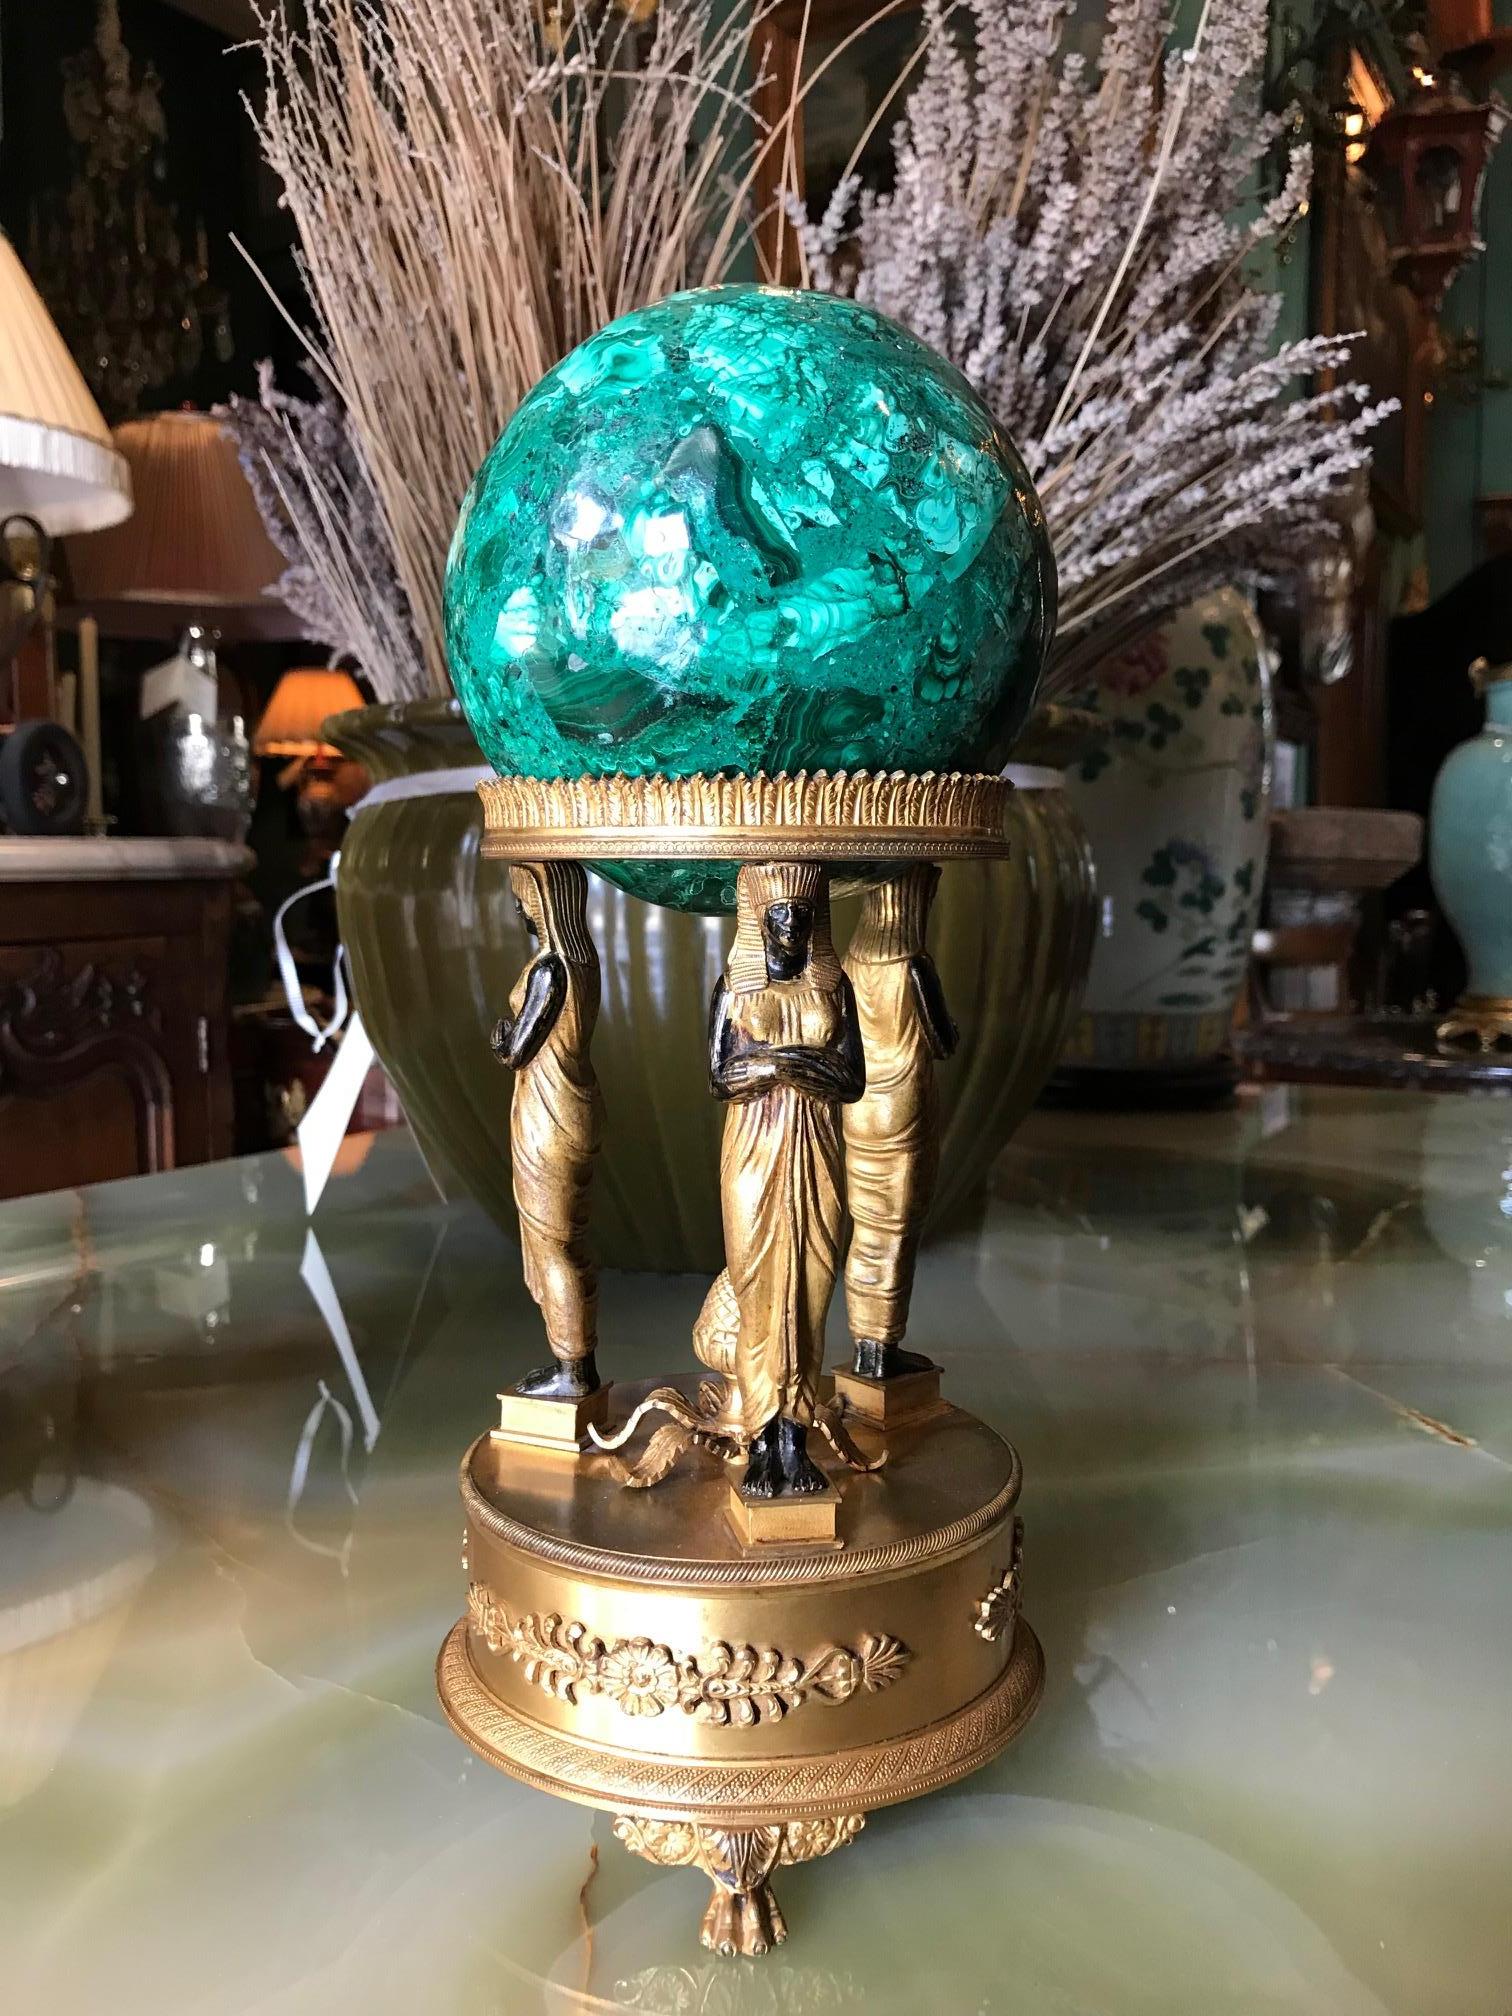 A Beautiful Empire style malachite orb on a bronze doré stand retour d'Egypte of 3 figures of standing maidens with a pine cone in the center an detailed crown holder hosting a large hand carved malachite round stone ball sphere
Malachite is a stone